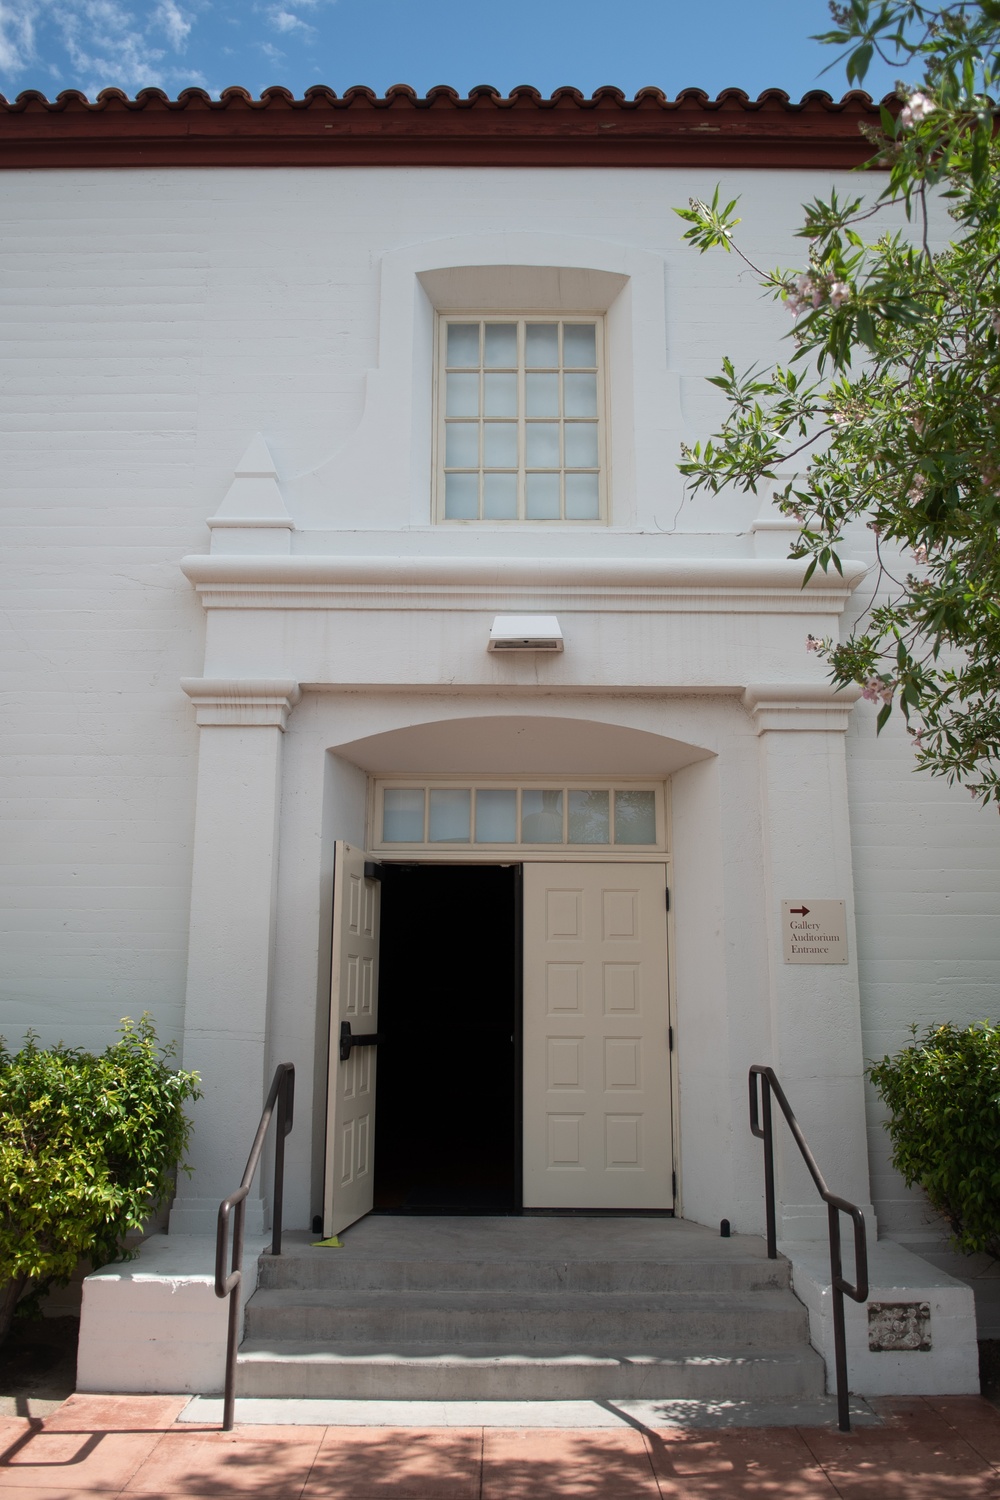 Entrance to the Historic Fifth Street School auditorium where the City of Las Vegas’ National Day of Prayer event was held